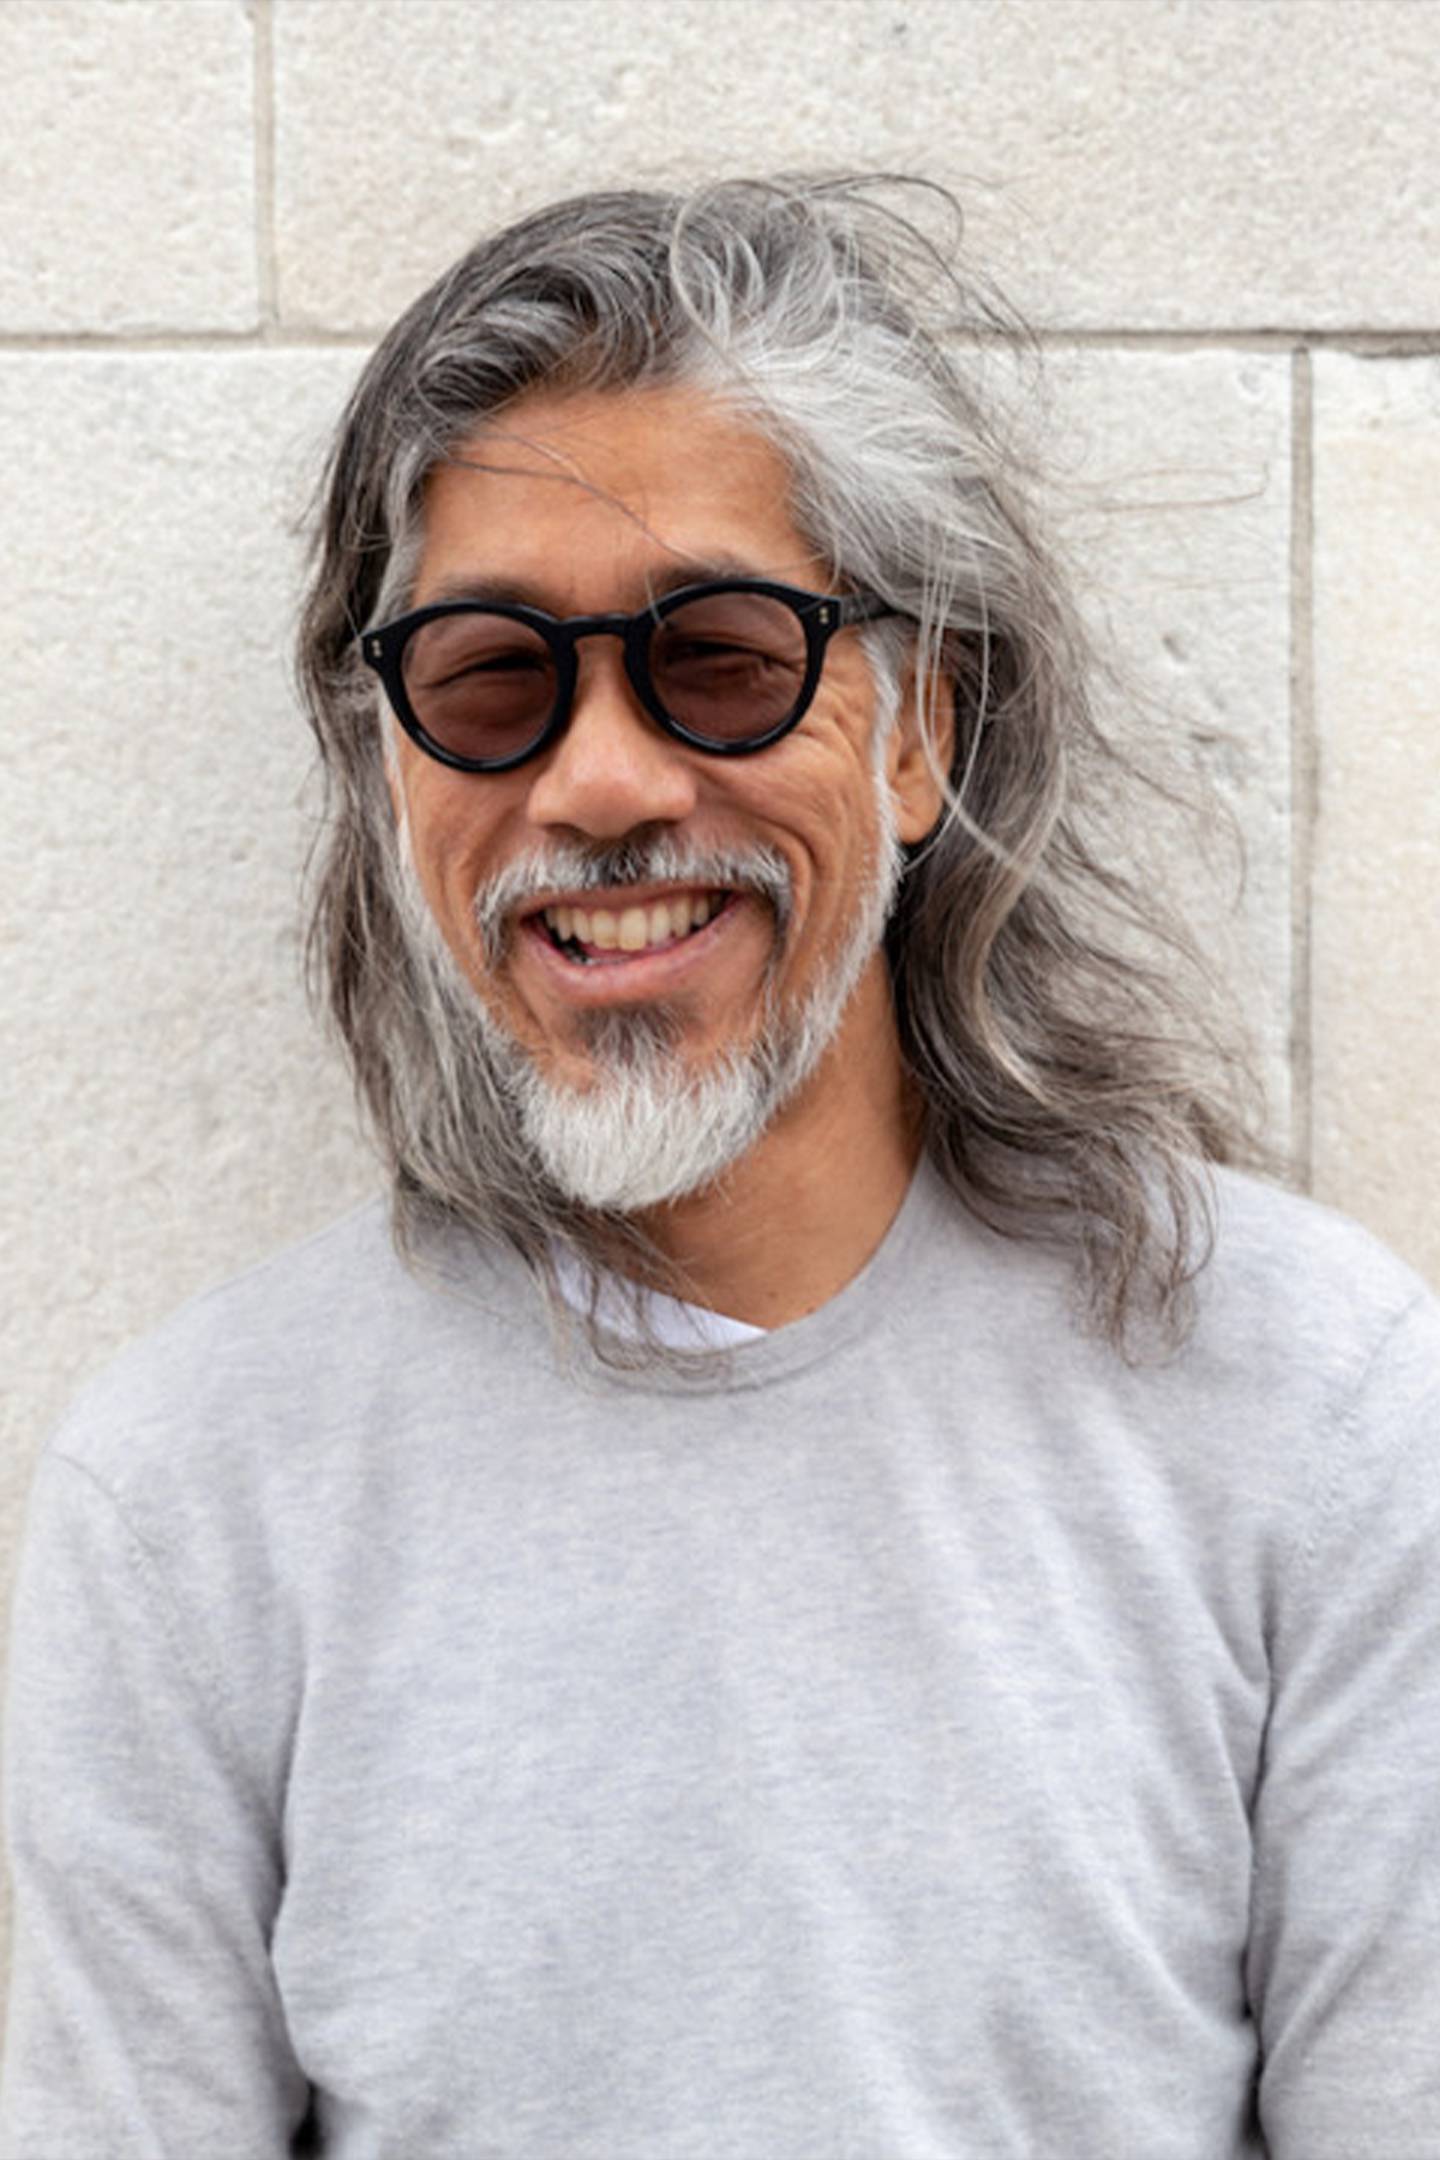 Keith Yamashita is a creative force who has guided countless teams and organisations through positive transformations.